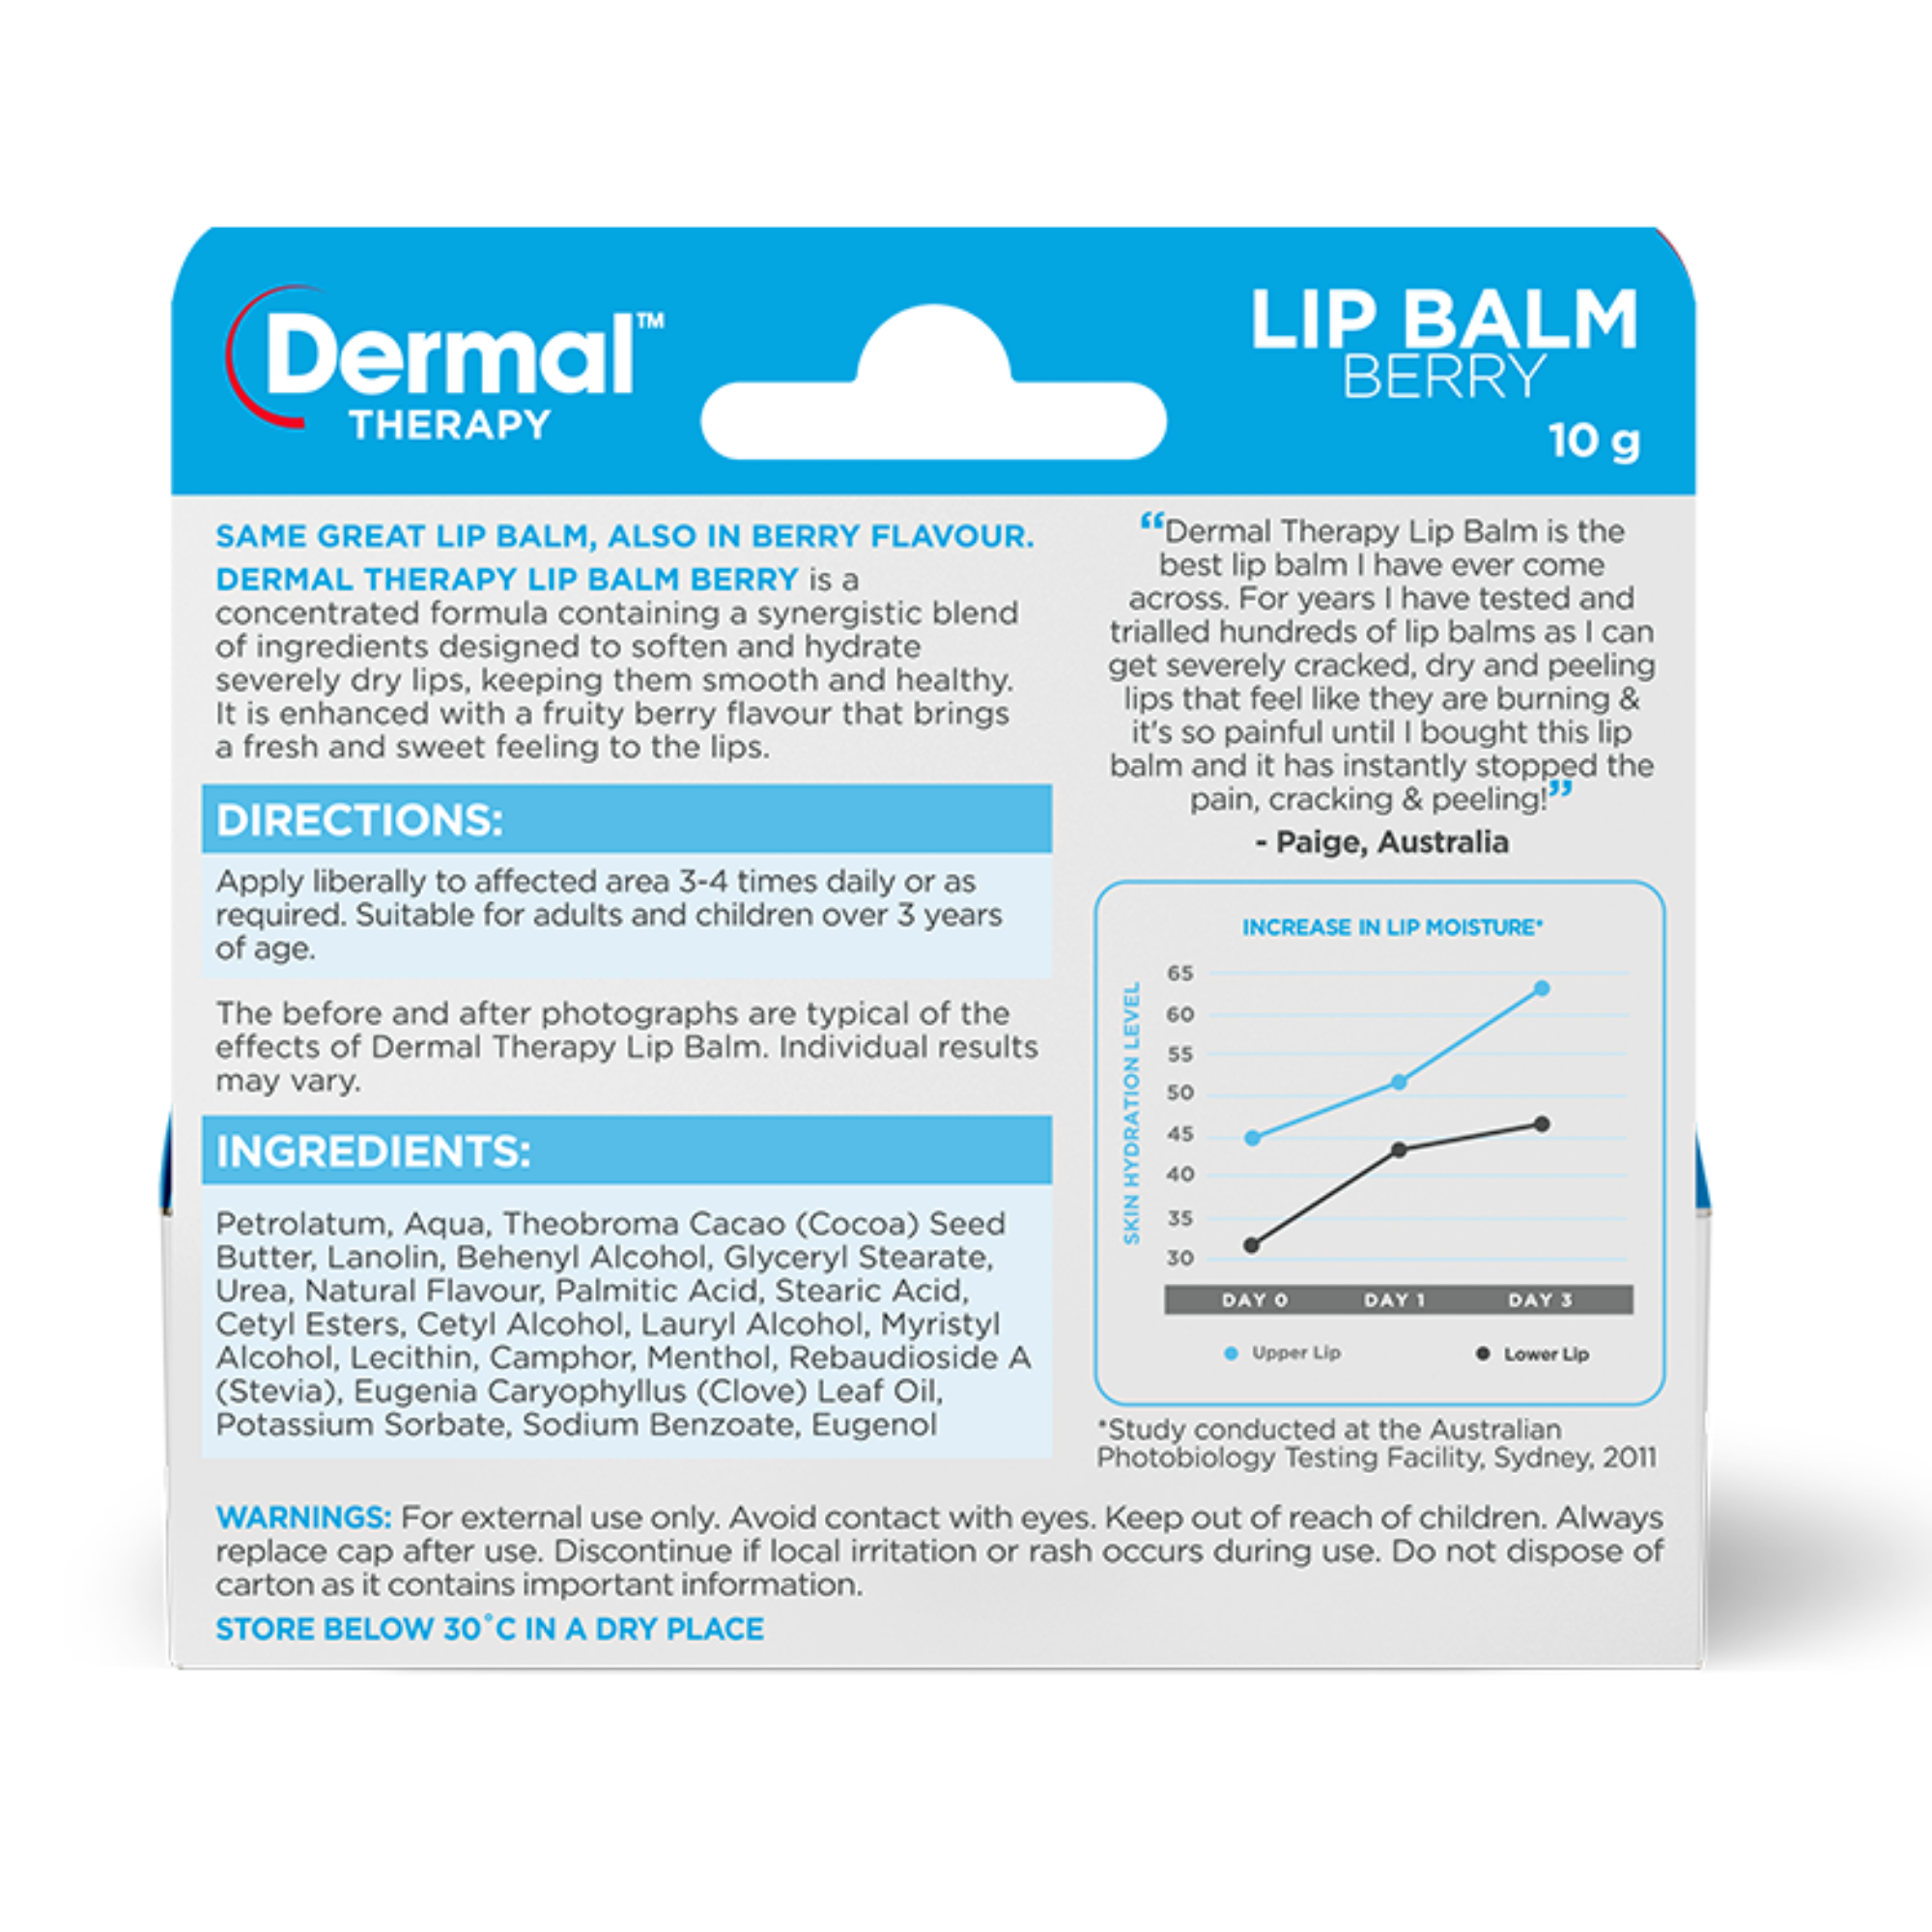 Dermal Therapy Lip Balm Enriched with Pawpaw 10g